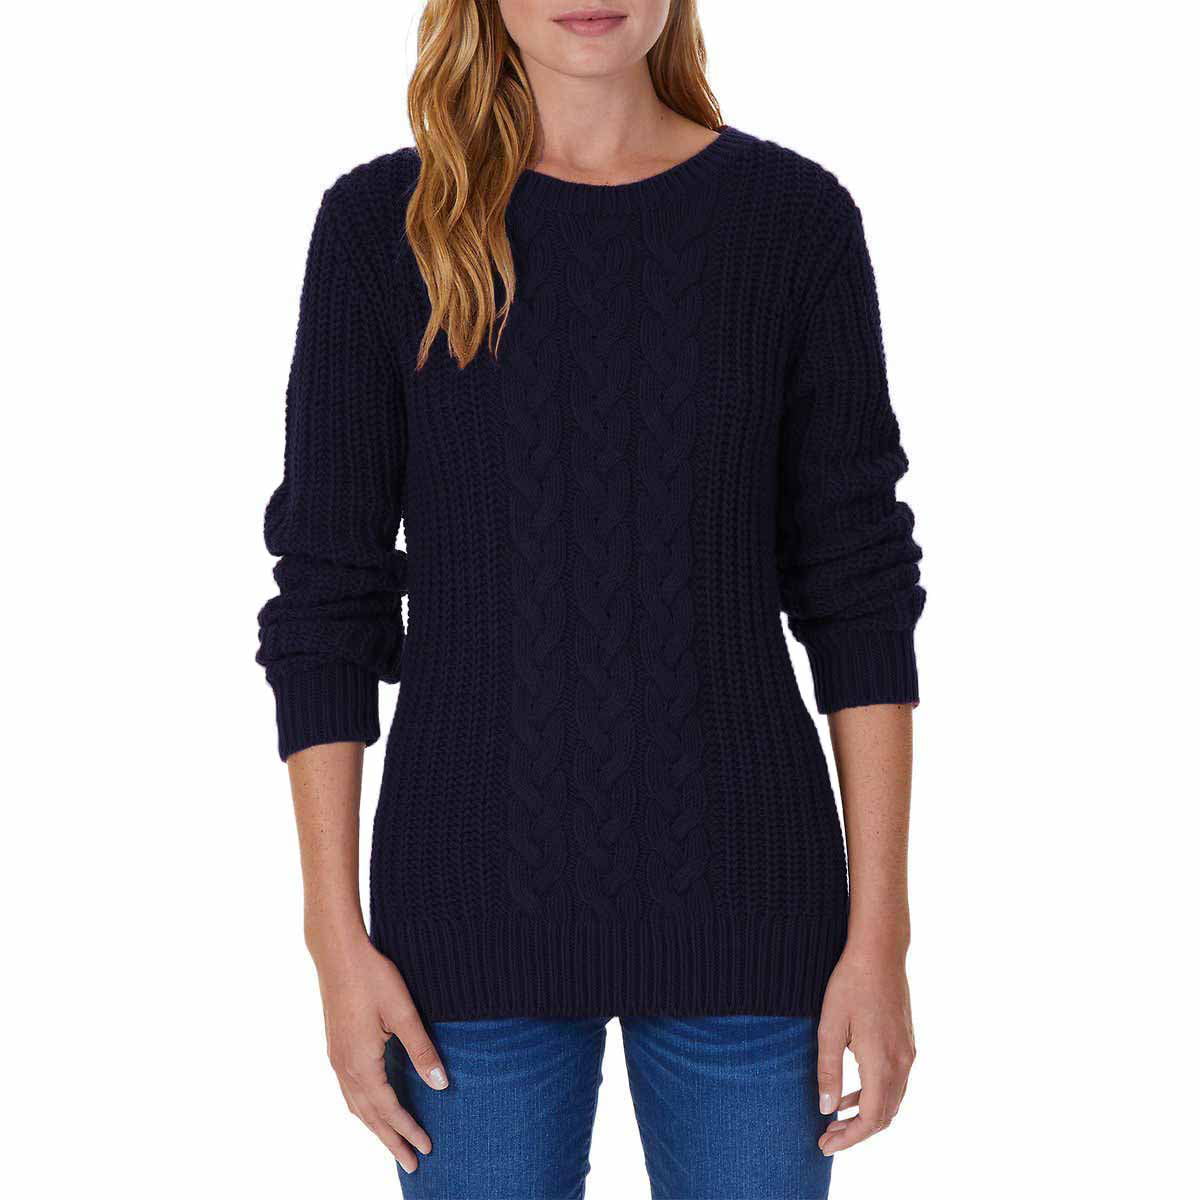 Navy US Size XL NWT Nautica Ladies Cable Tunic Sweater Color 